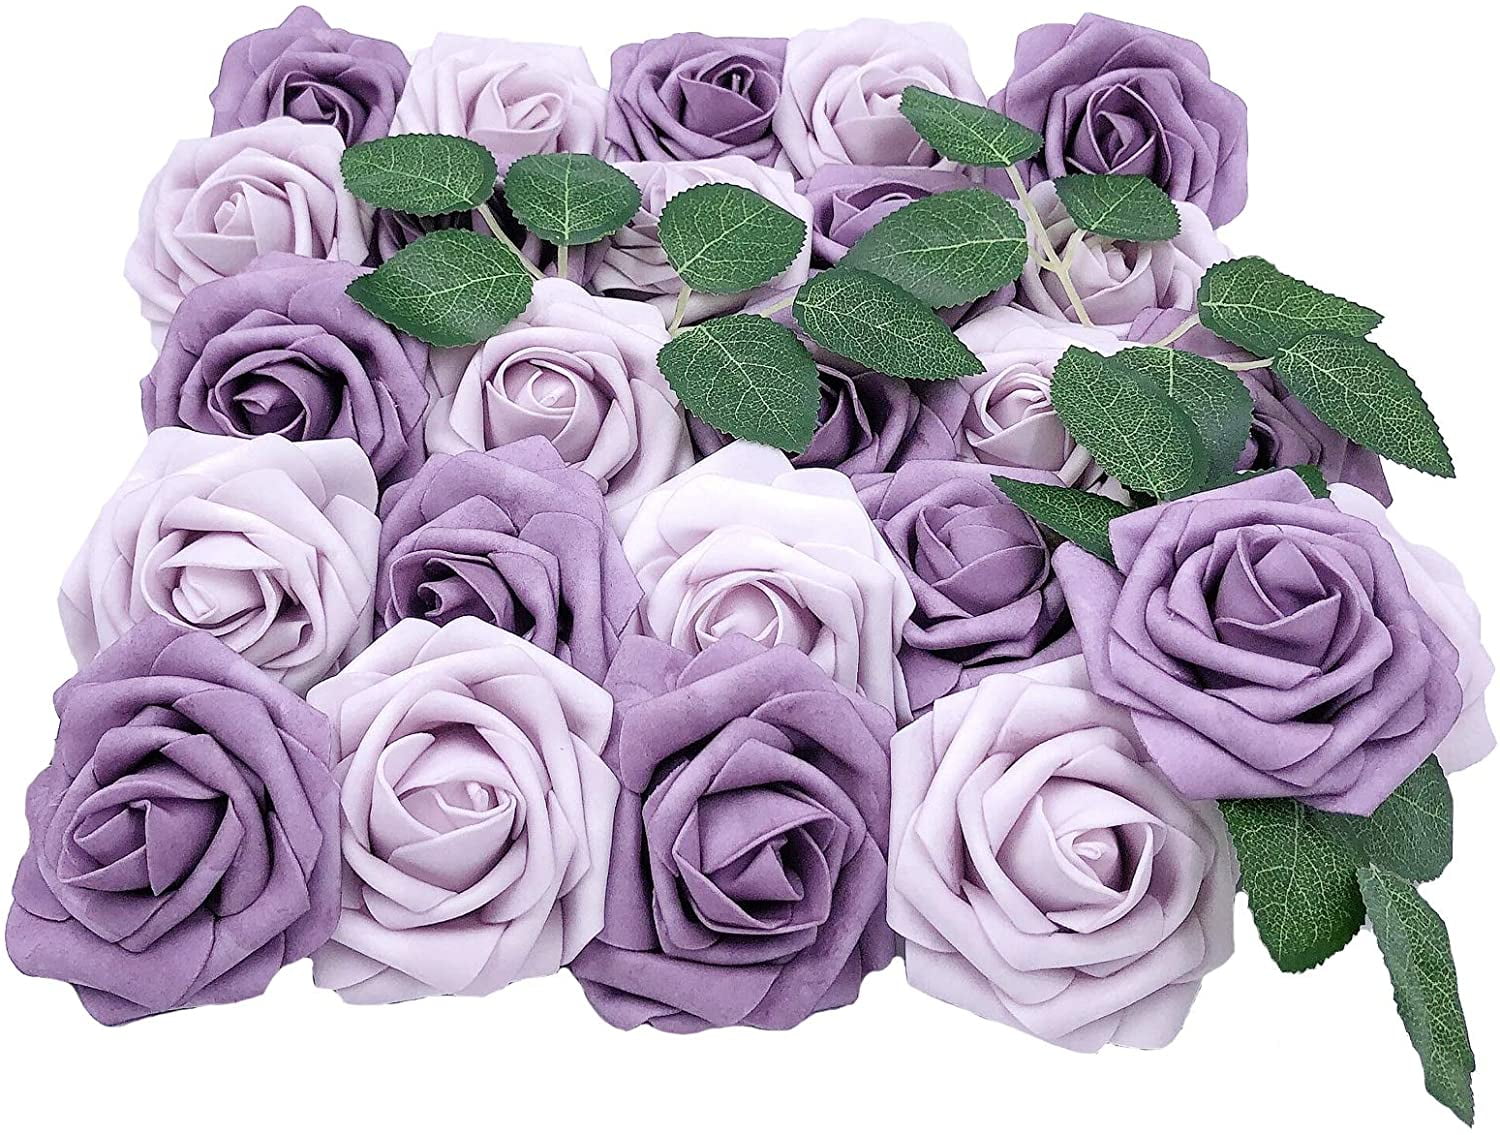 Regular 3 Lings moment Artificial Rose Flowers 50pcs Berry Pink Foam Roses w/Stem for DIY Wedding Bouquets Centerpieces Bridal Shower Party Home Decorations